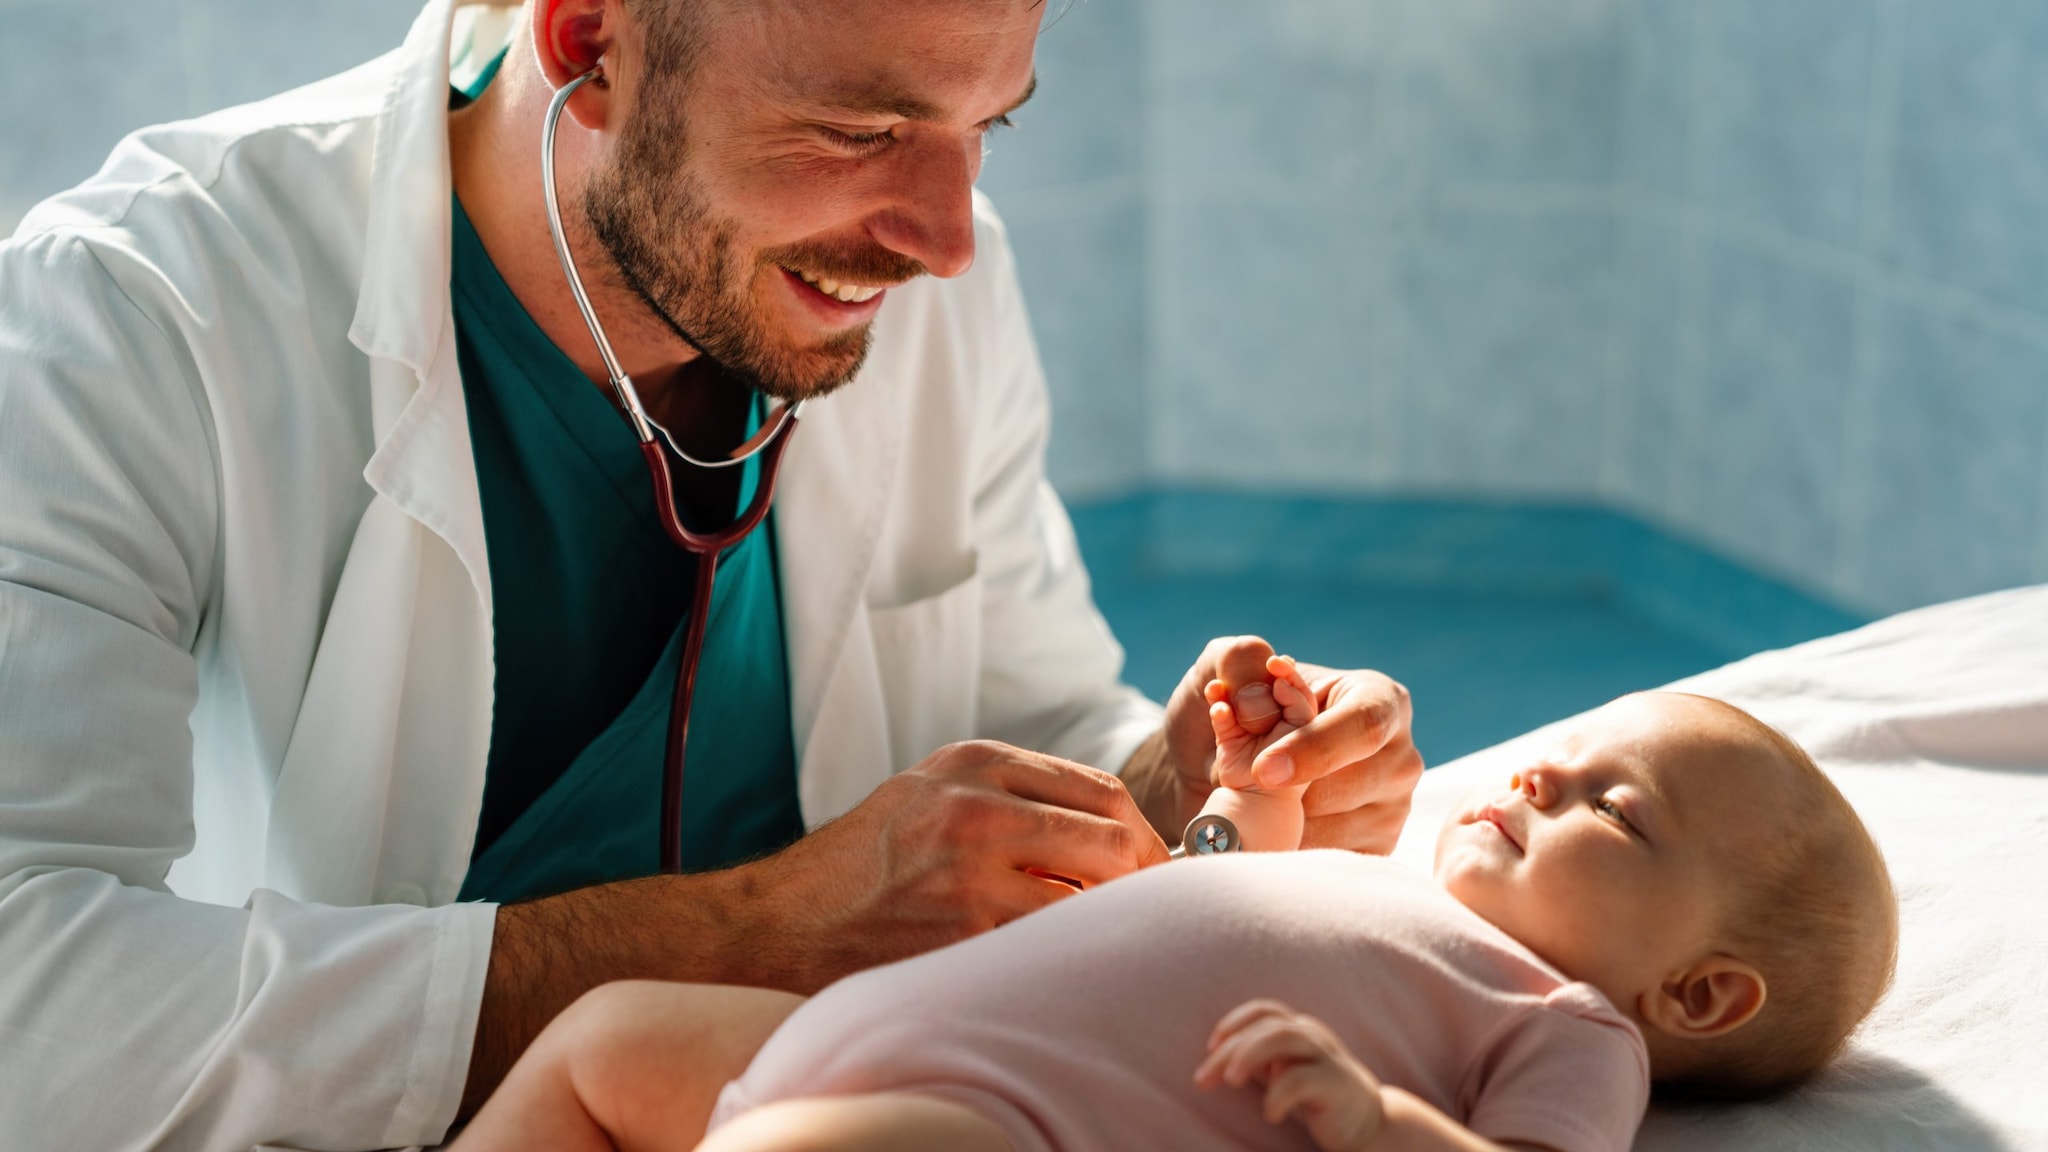 Doctor wearing stethoscope to exam baby during a check-up.